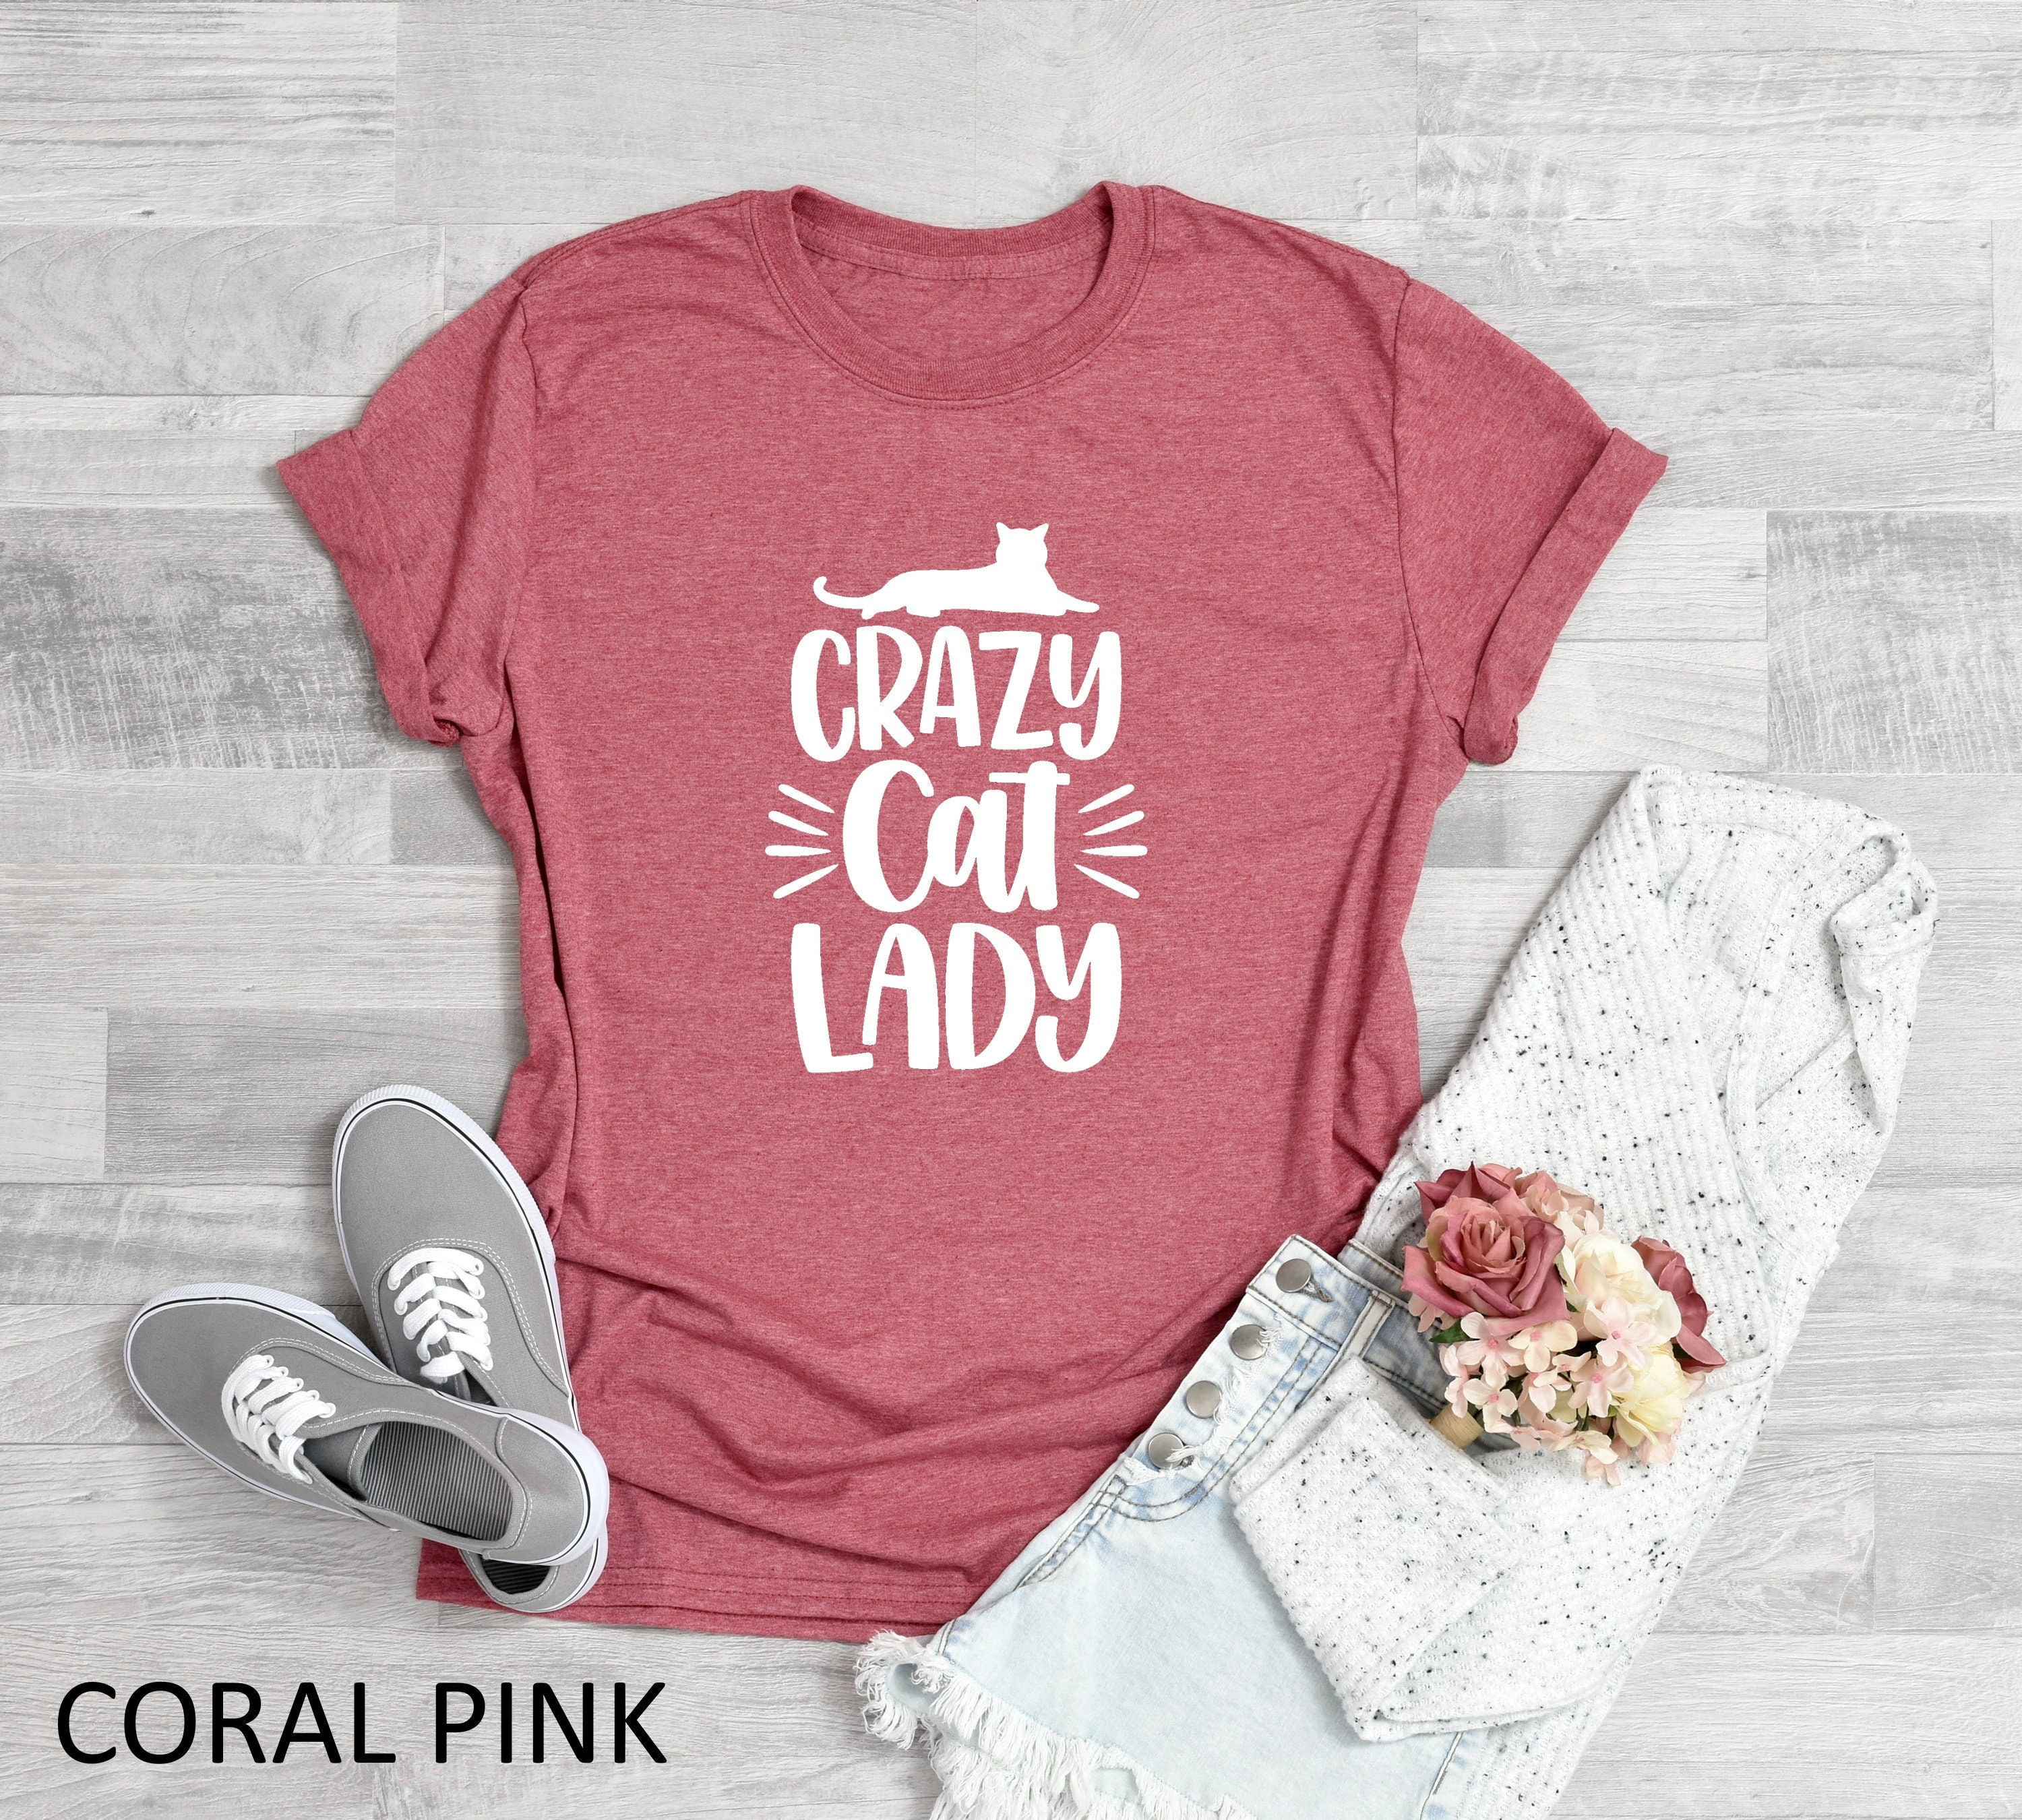  Frequency Of Heartbeat Crazy Cat Lady T-Shirt : Clothing, Shoes  & Jewelry